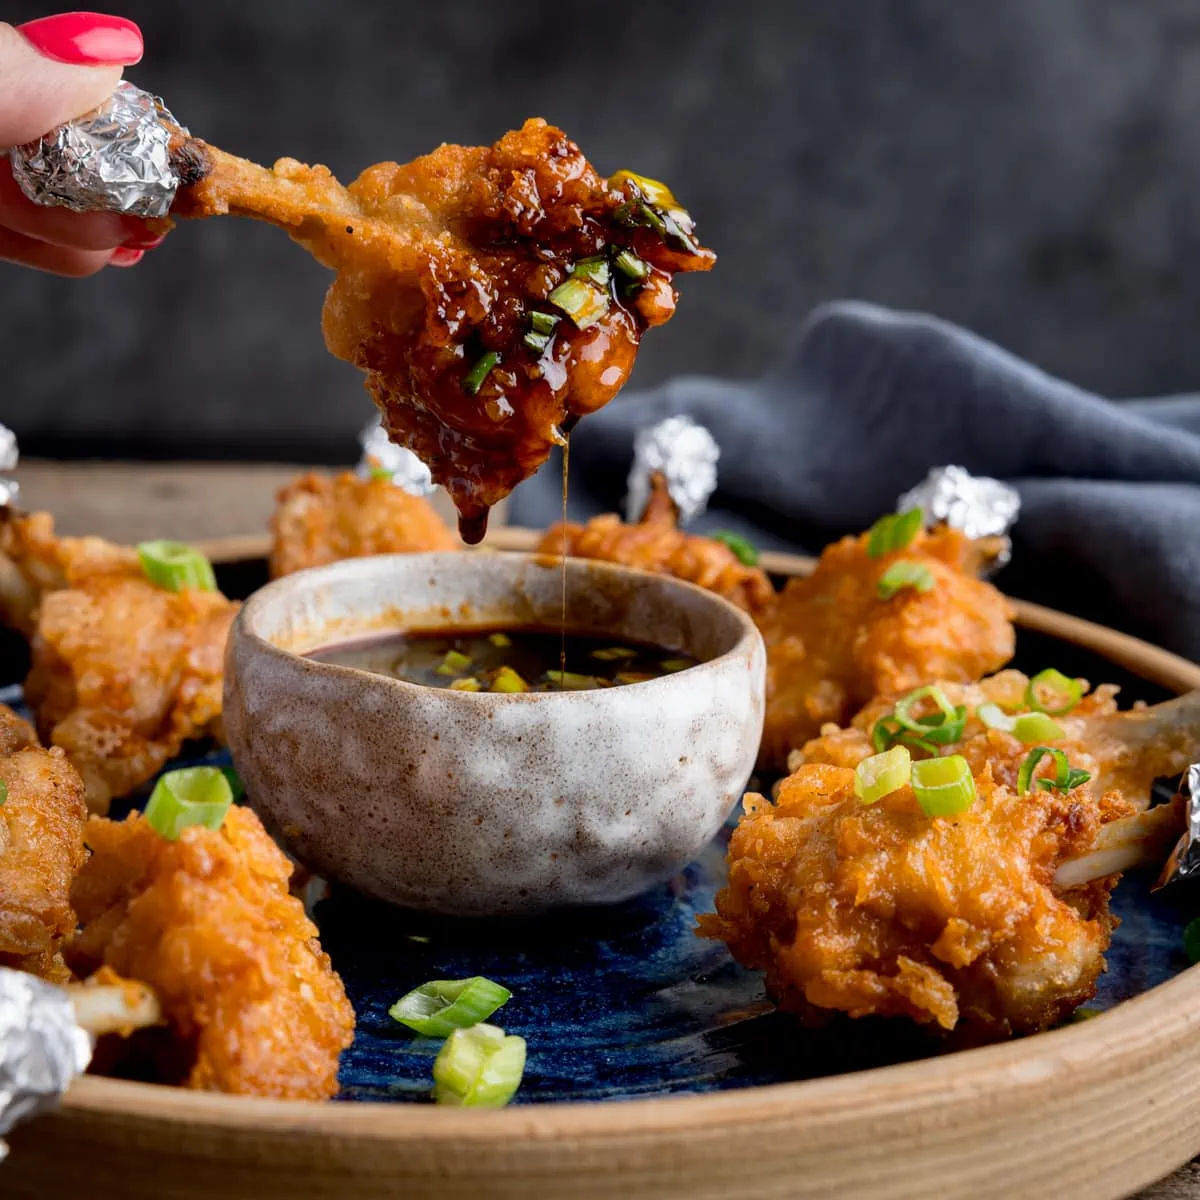 Square image of a plate of chicken lollipops with a bowl of spicy dipping sauce. One of the wings is being dipped into the sauce and is dripping. The wing is being held by fingers with pink-painted fingernails.